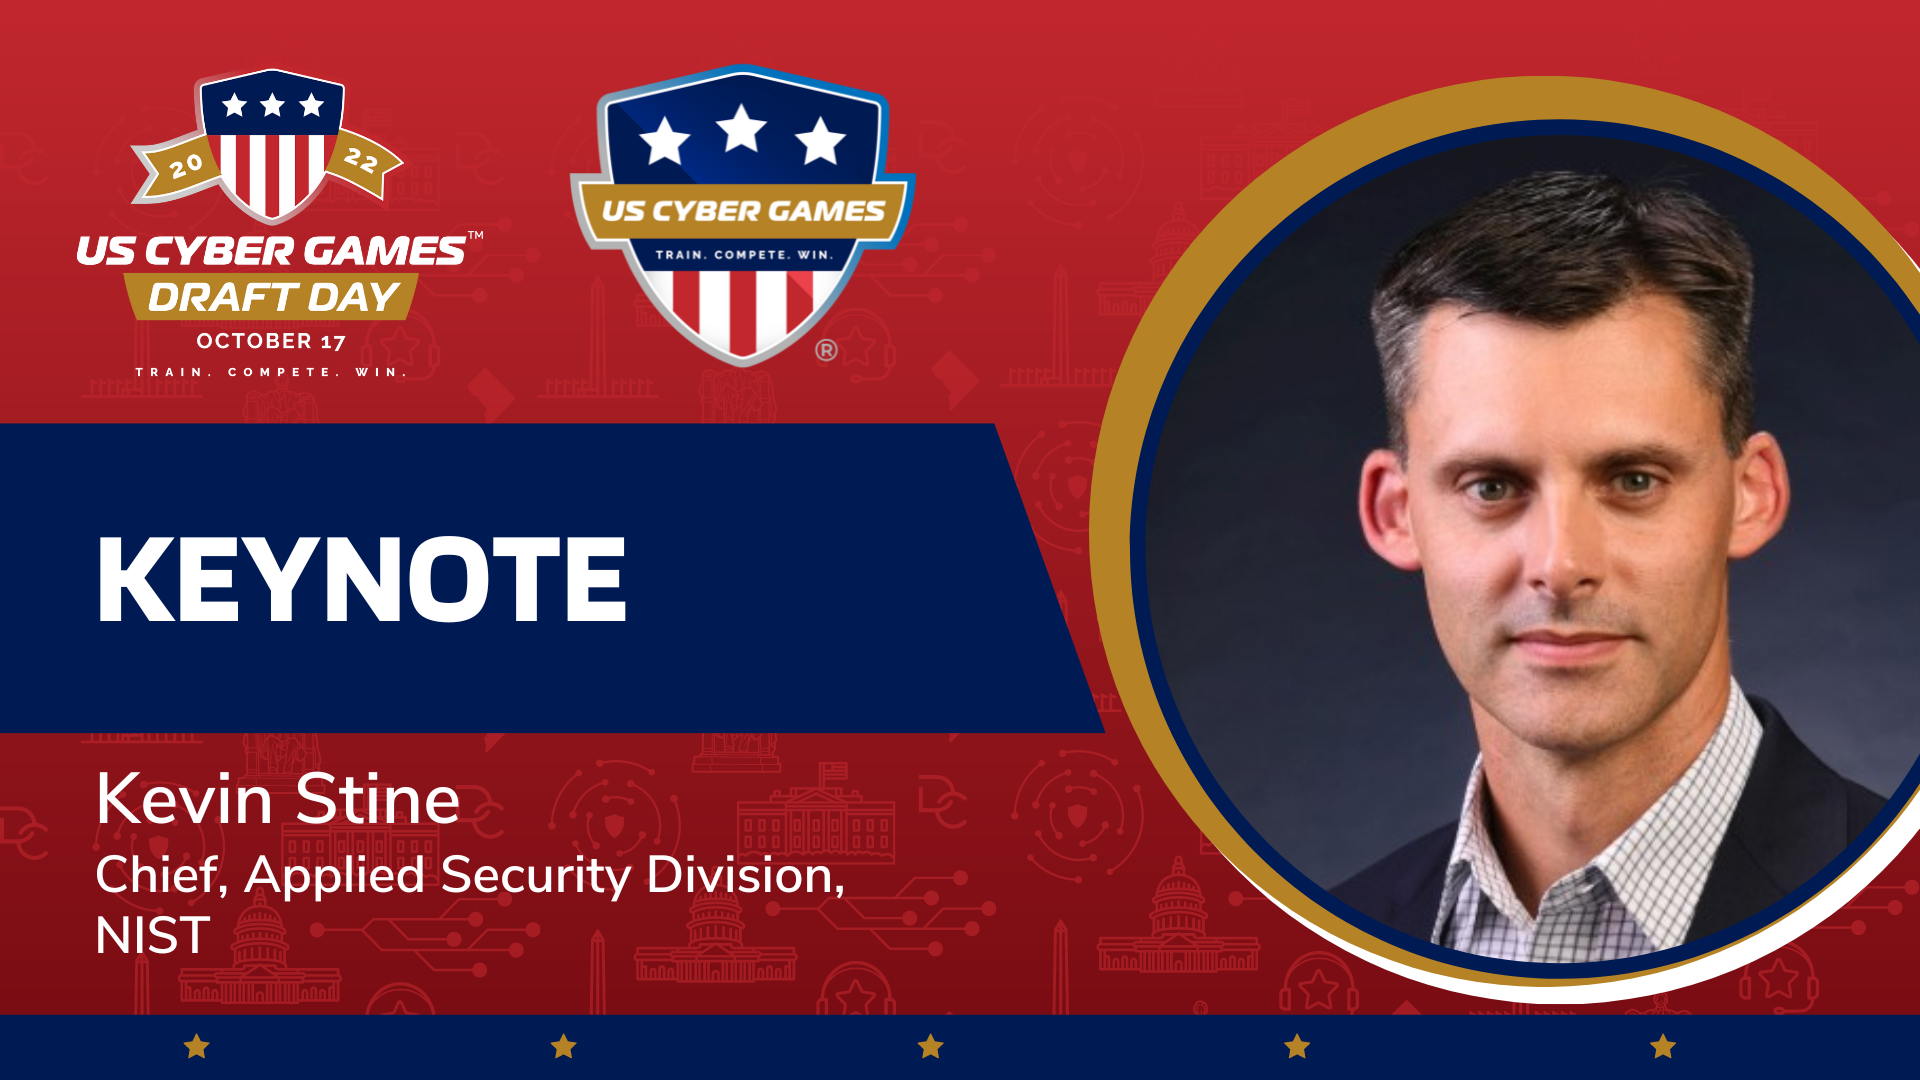 Watch the Season II, US Cyber Games Draft Day keynote with Kevin Stine, Chief, Applied Security Division, NIST